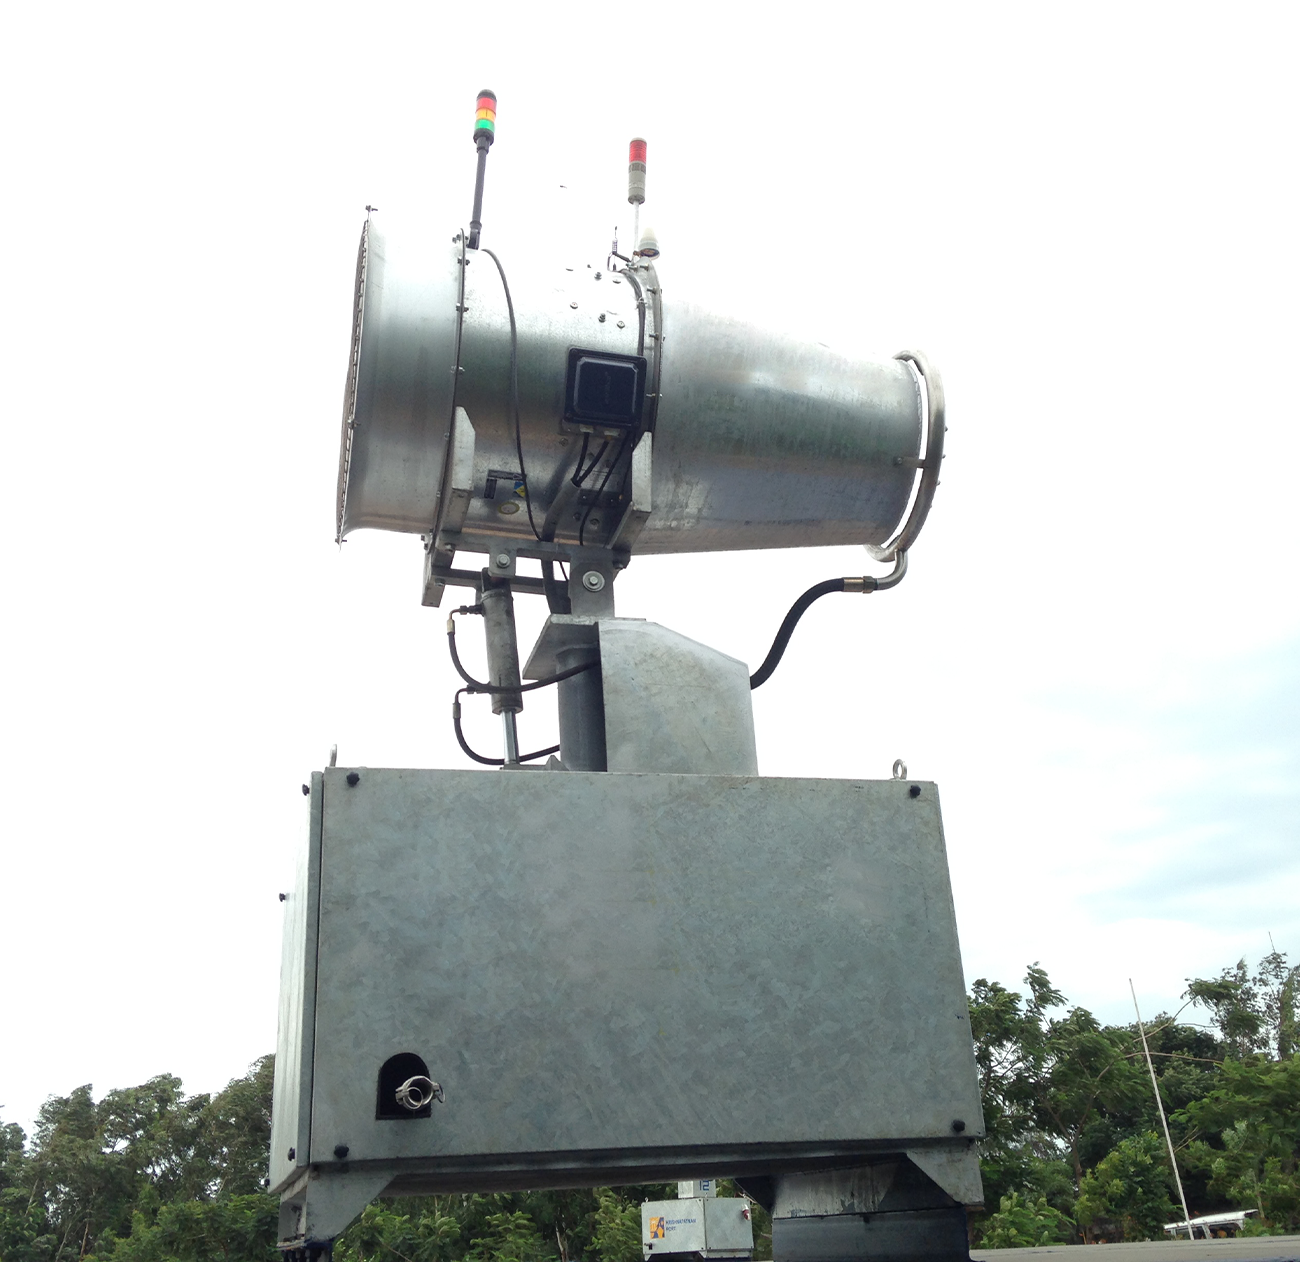 spray cannon full view image